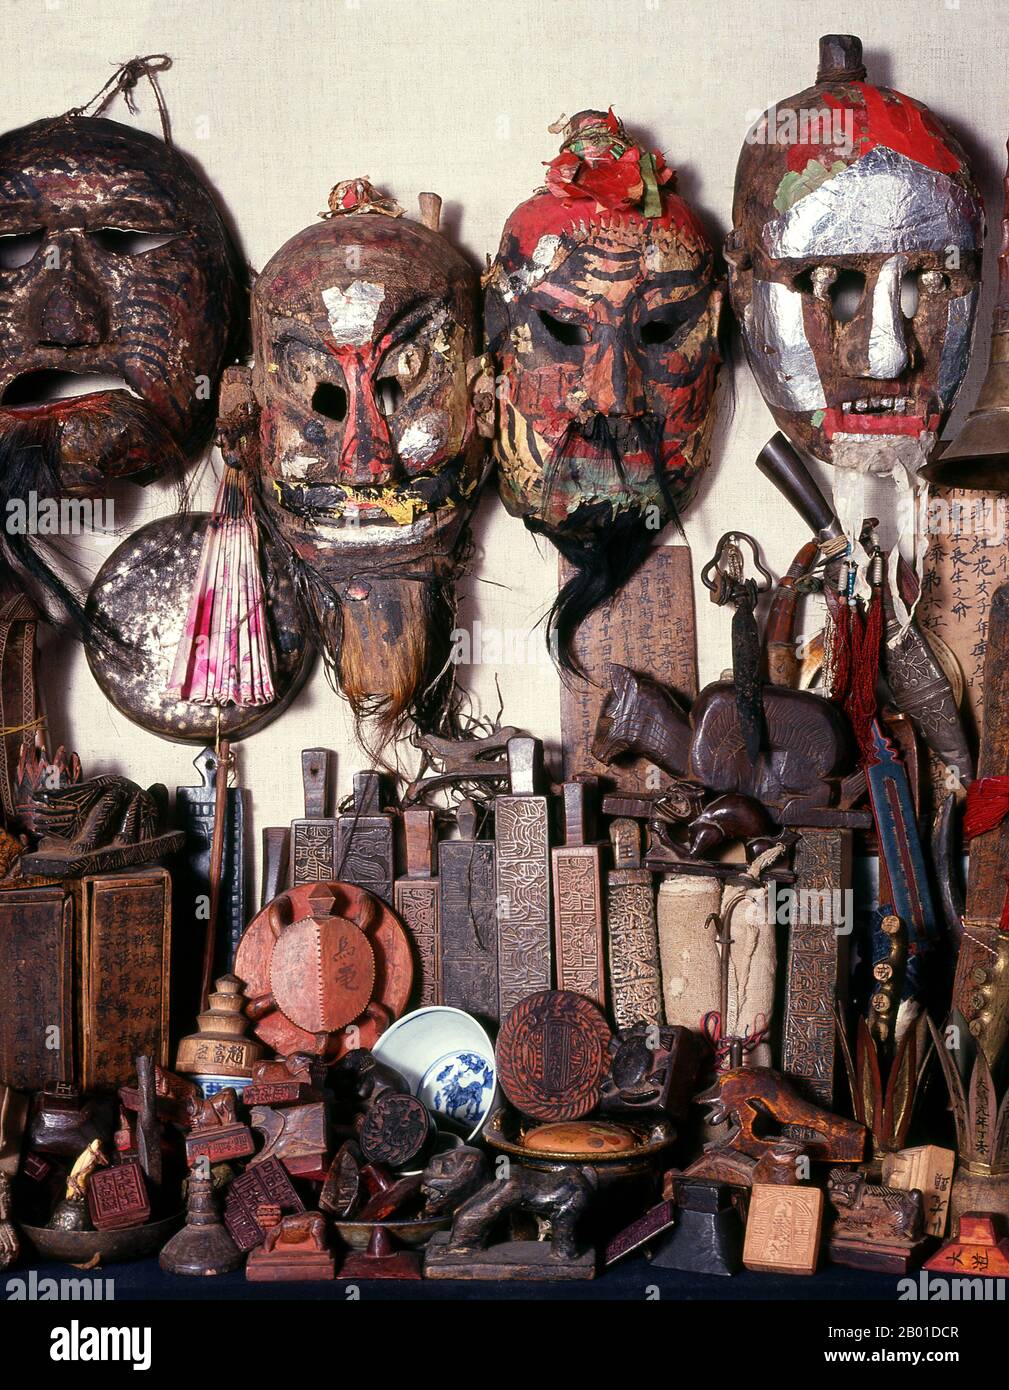 Thailand/China: Yao shaman's masks and other shaman paraphernalia from northern Thailand.  The Yao nationality (its great majority branch is also known as Mien; Pinyin: Yáo zú; Vietnamese: người Dao) is a government classification for various minorities in China. They form one of the 55 ethnic minority groups officially recognised by the People's Republic of China, where they reside in the mountainous terrain of the southwest and south.  They also form one of the 54 ethnic groups officially recognised by Vietnam. Stock Photo